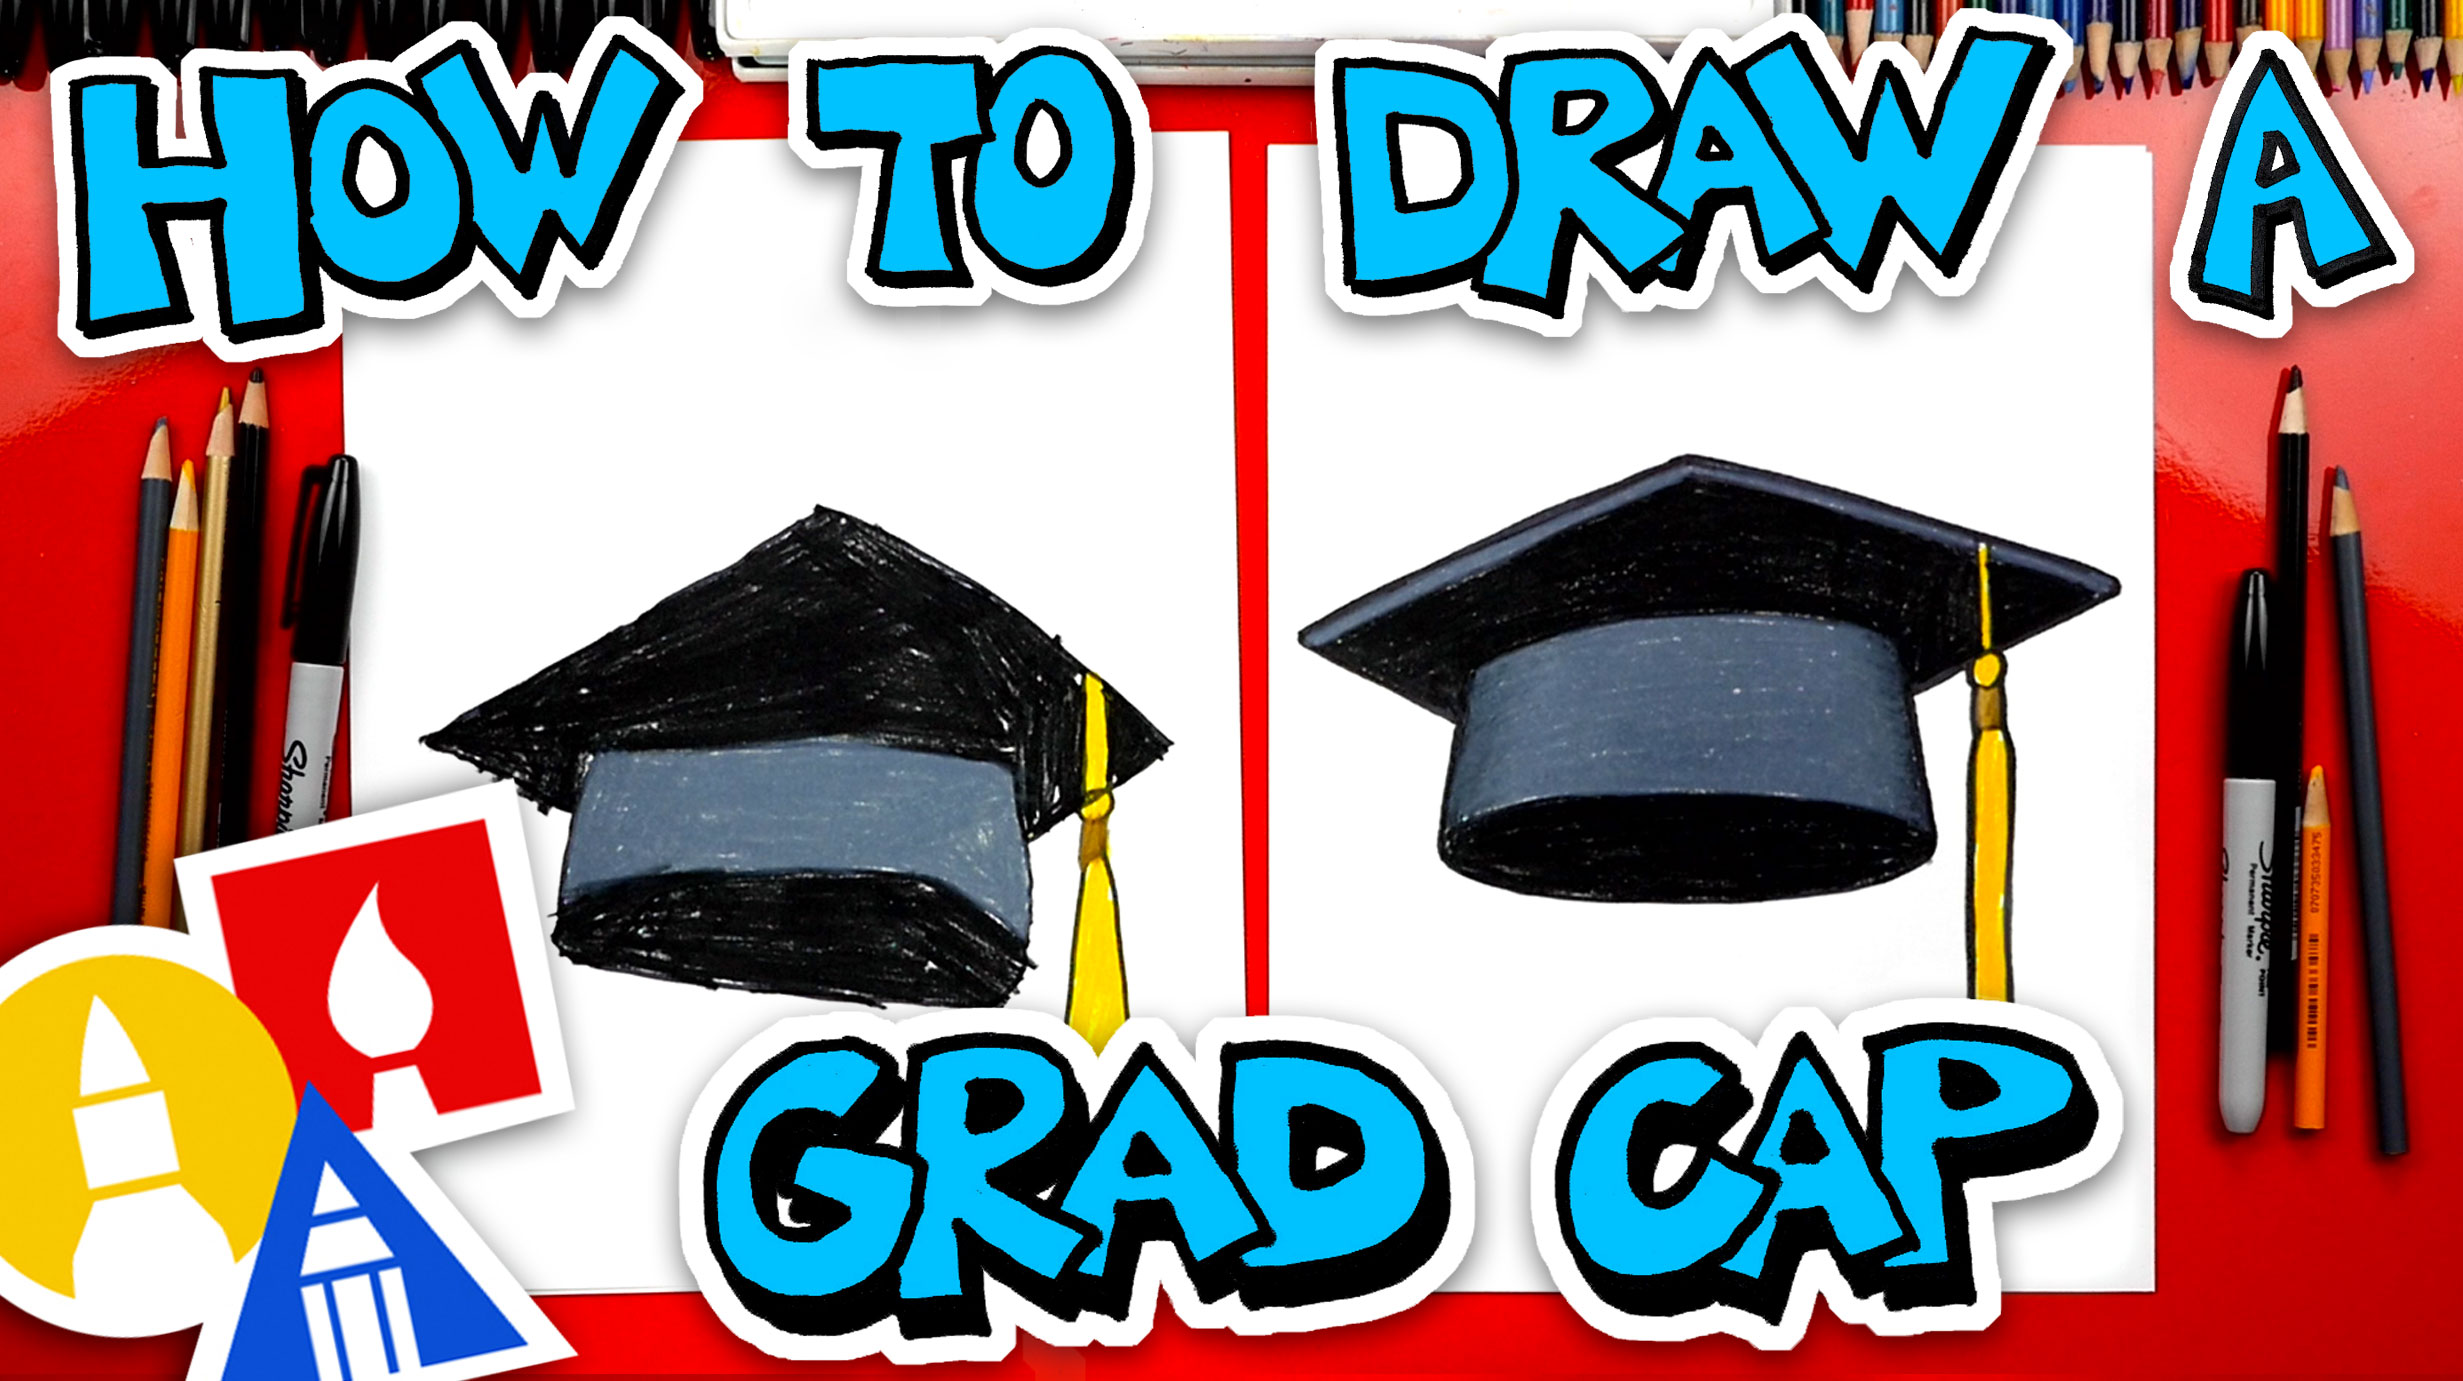 How to draw a cap // Easy cap drawing - YouTube